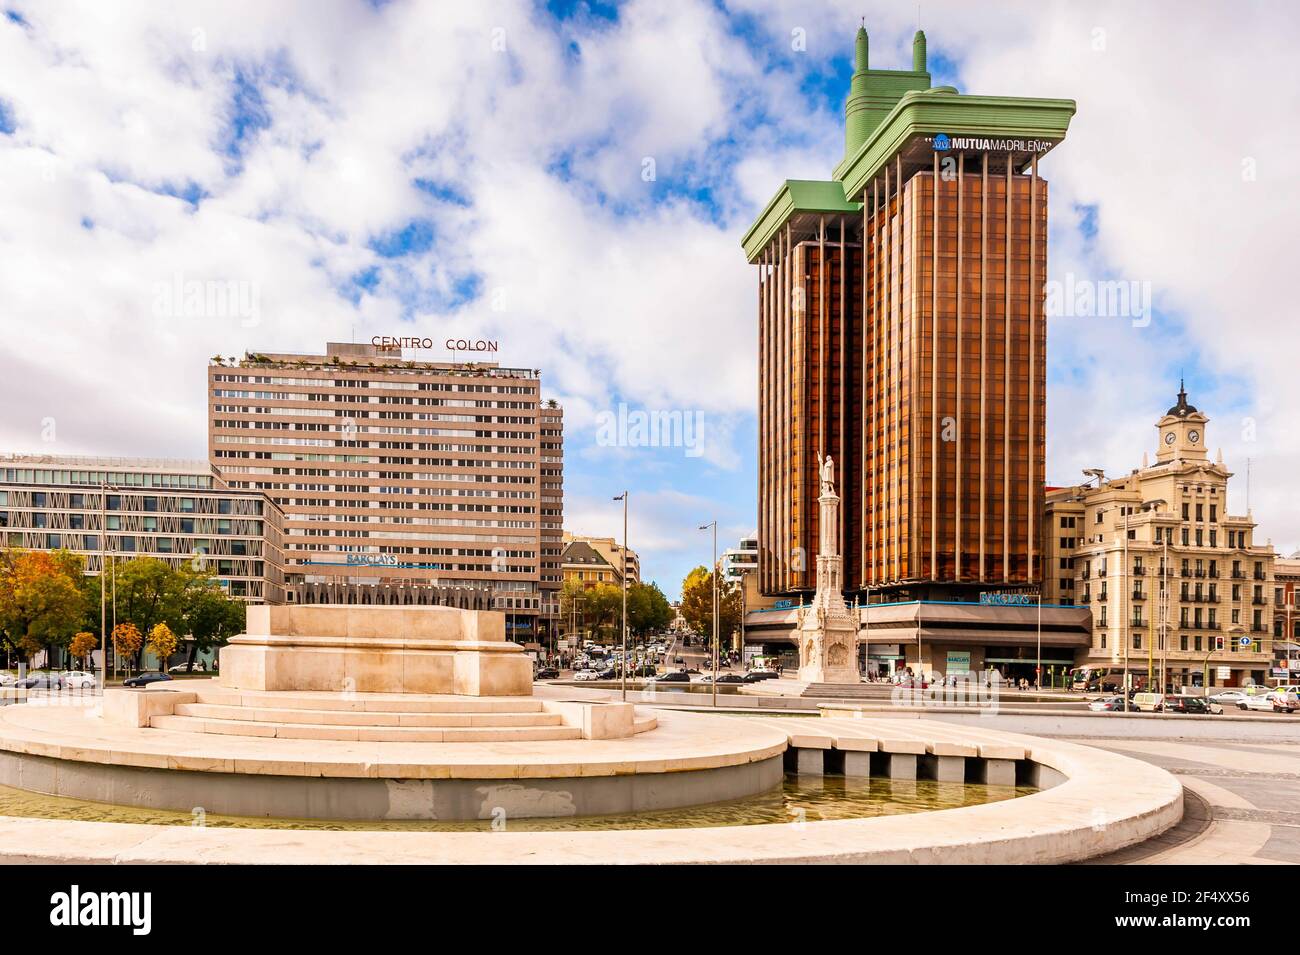 Plaza Colon, great square of Madrid in Spain Stock Photo